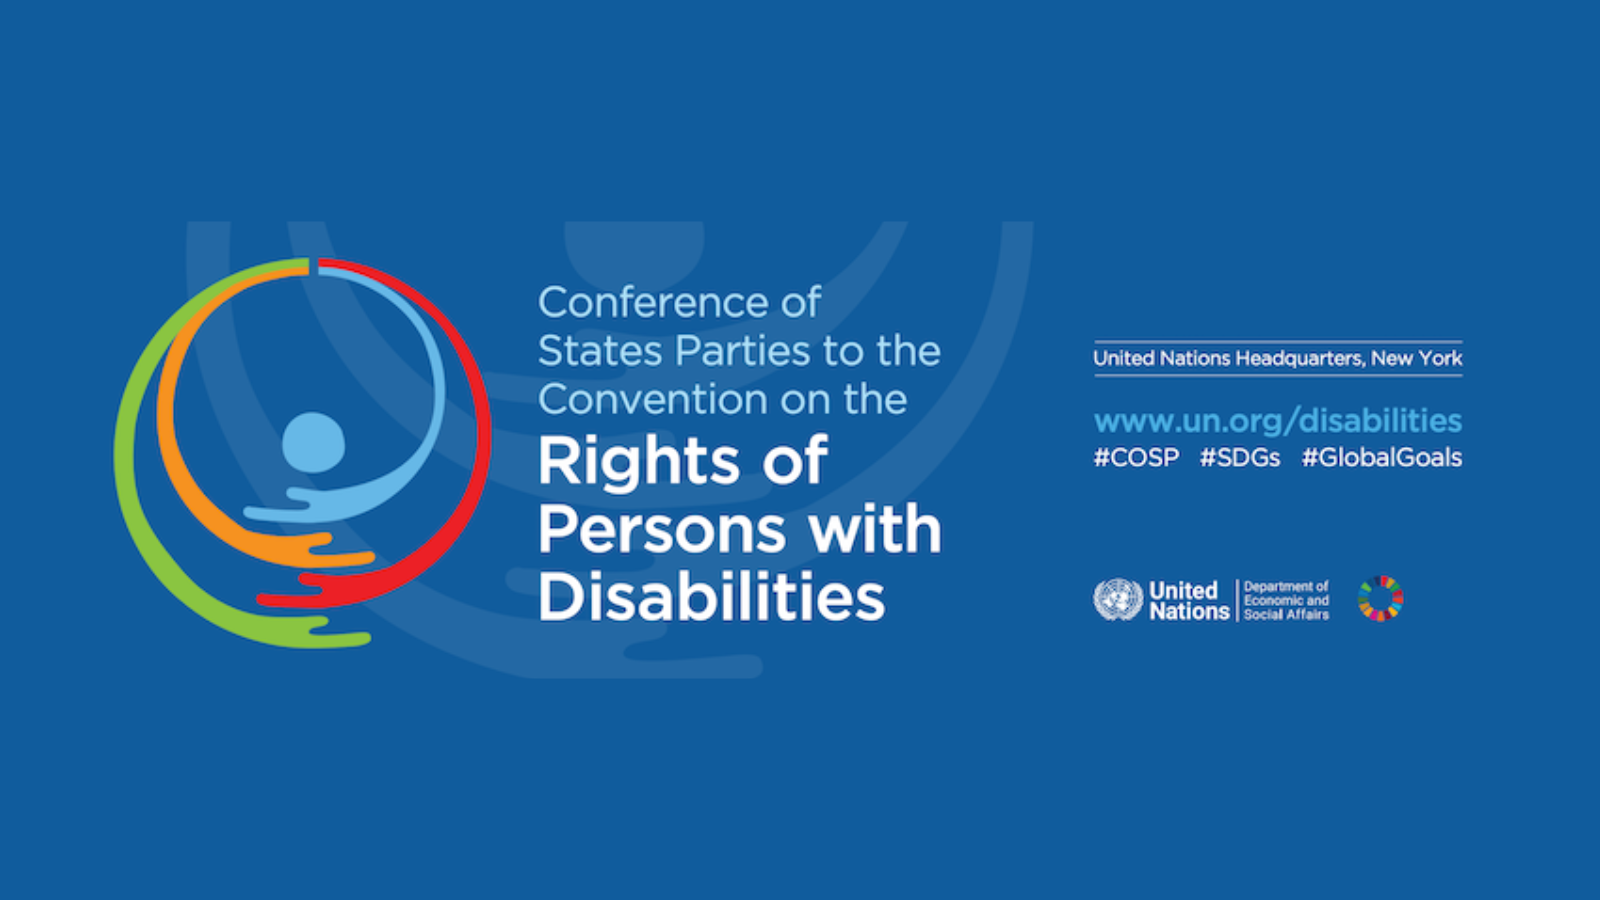 Morocco re-elected to UN Committee on Rights of Persons with Disabilities